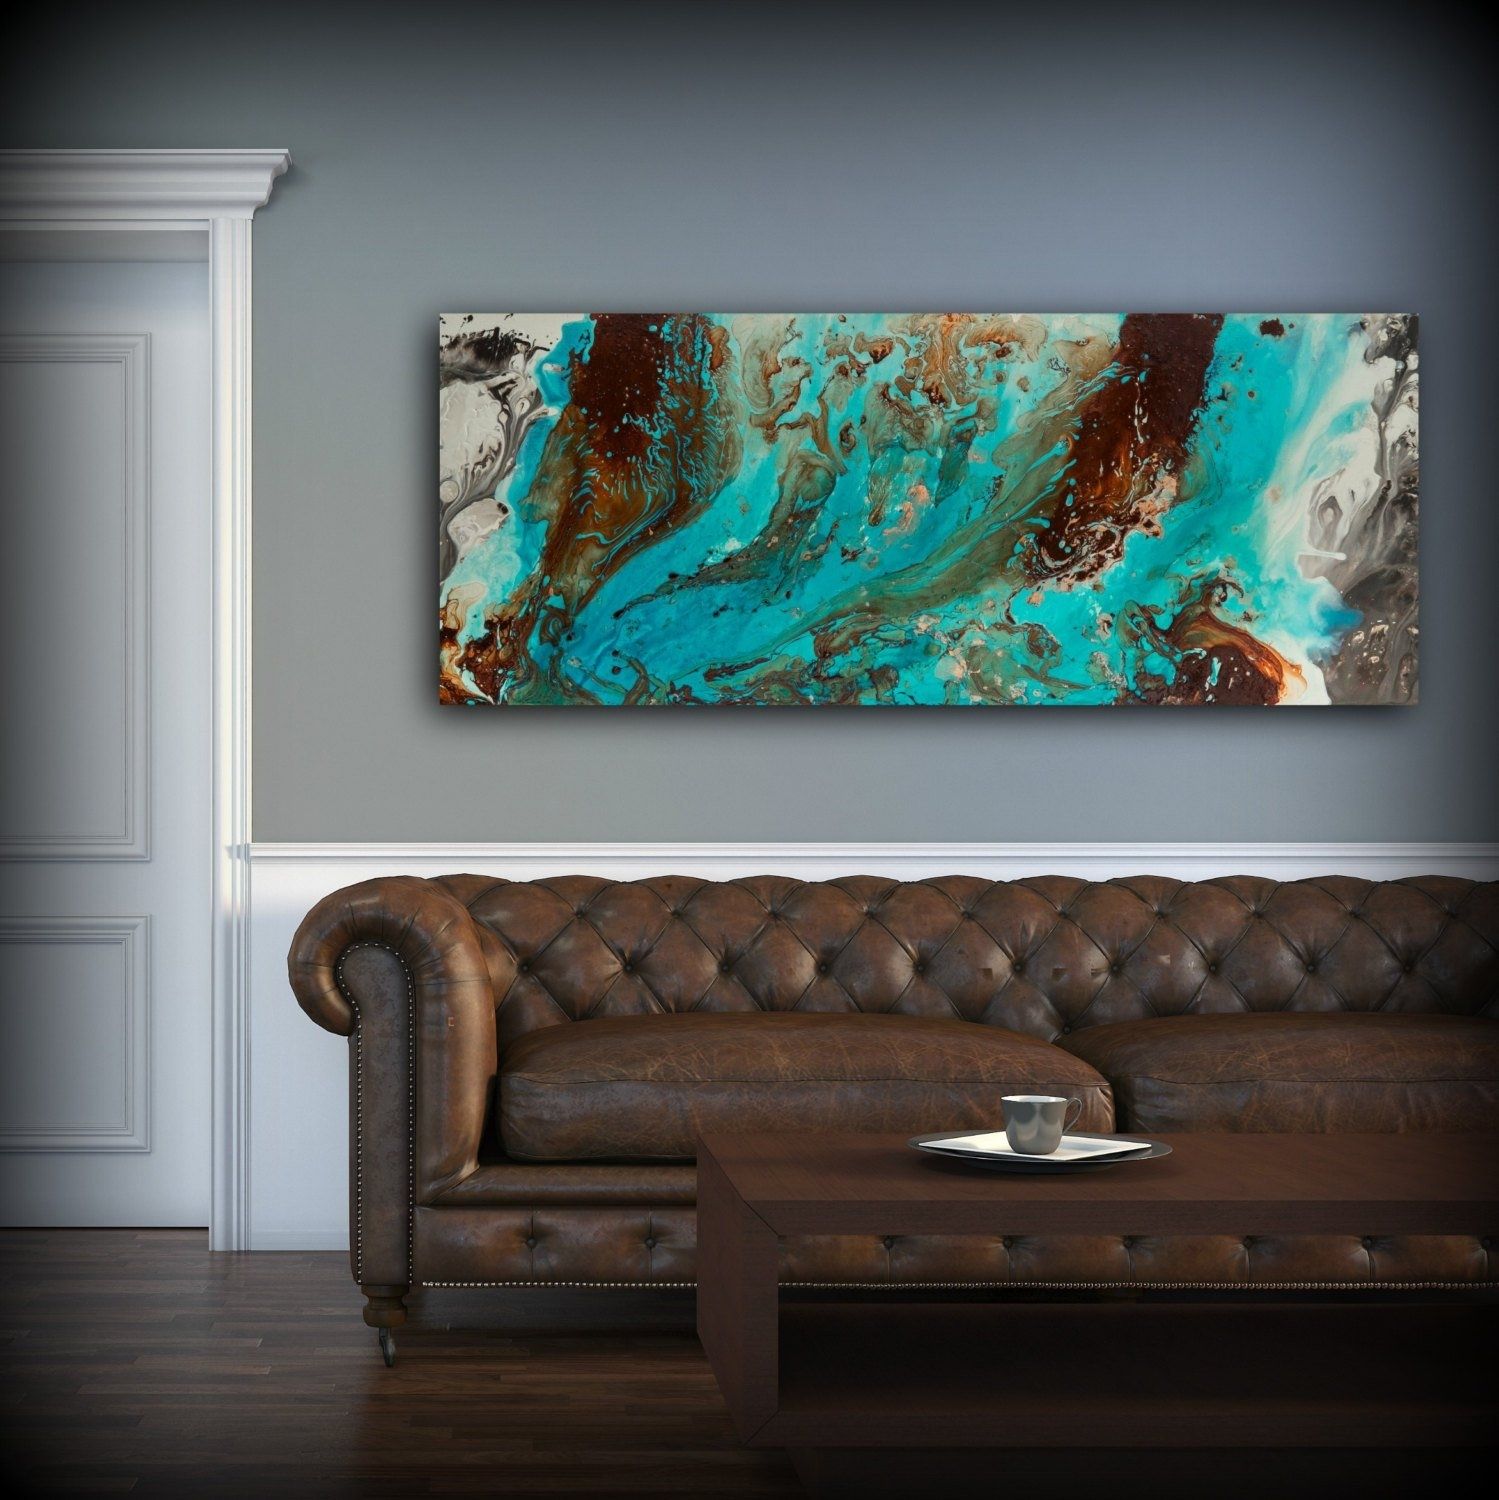 Aqua Print, Blue And Brown Wall Art Decor, Colourful, Bohemian Art For Teal And Brown Wall Art (Photo 1 of 20)